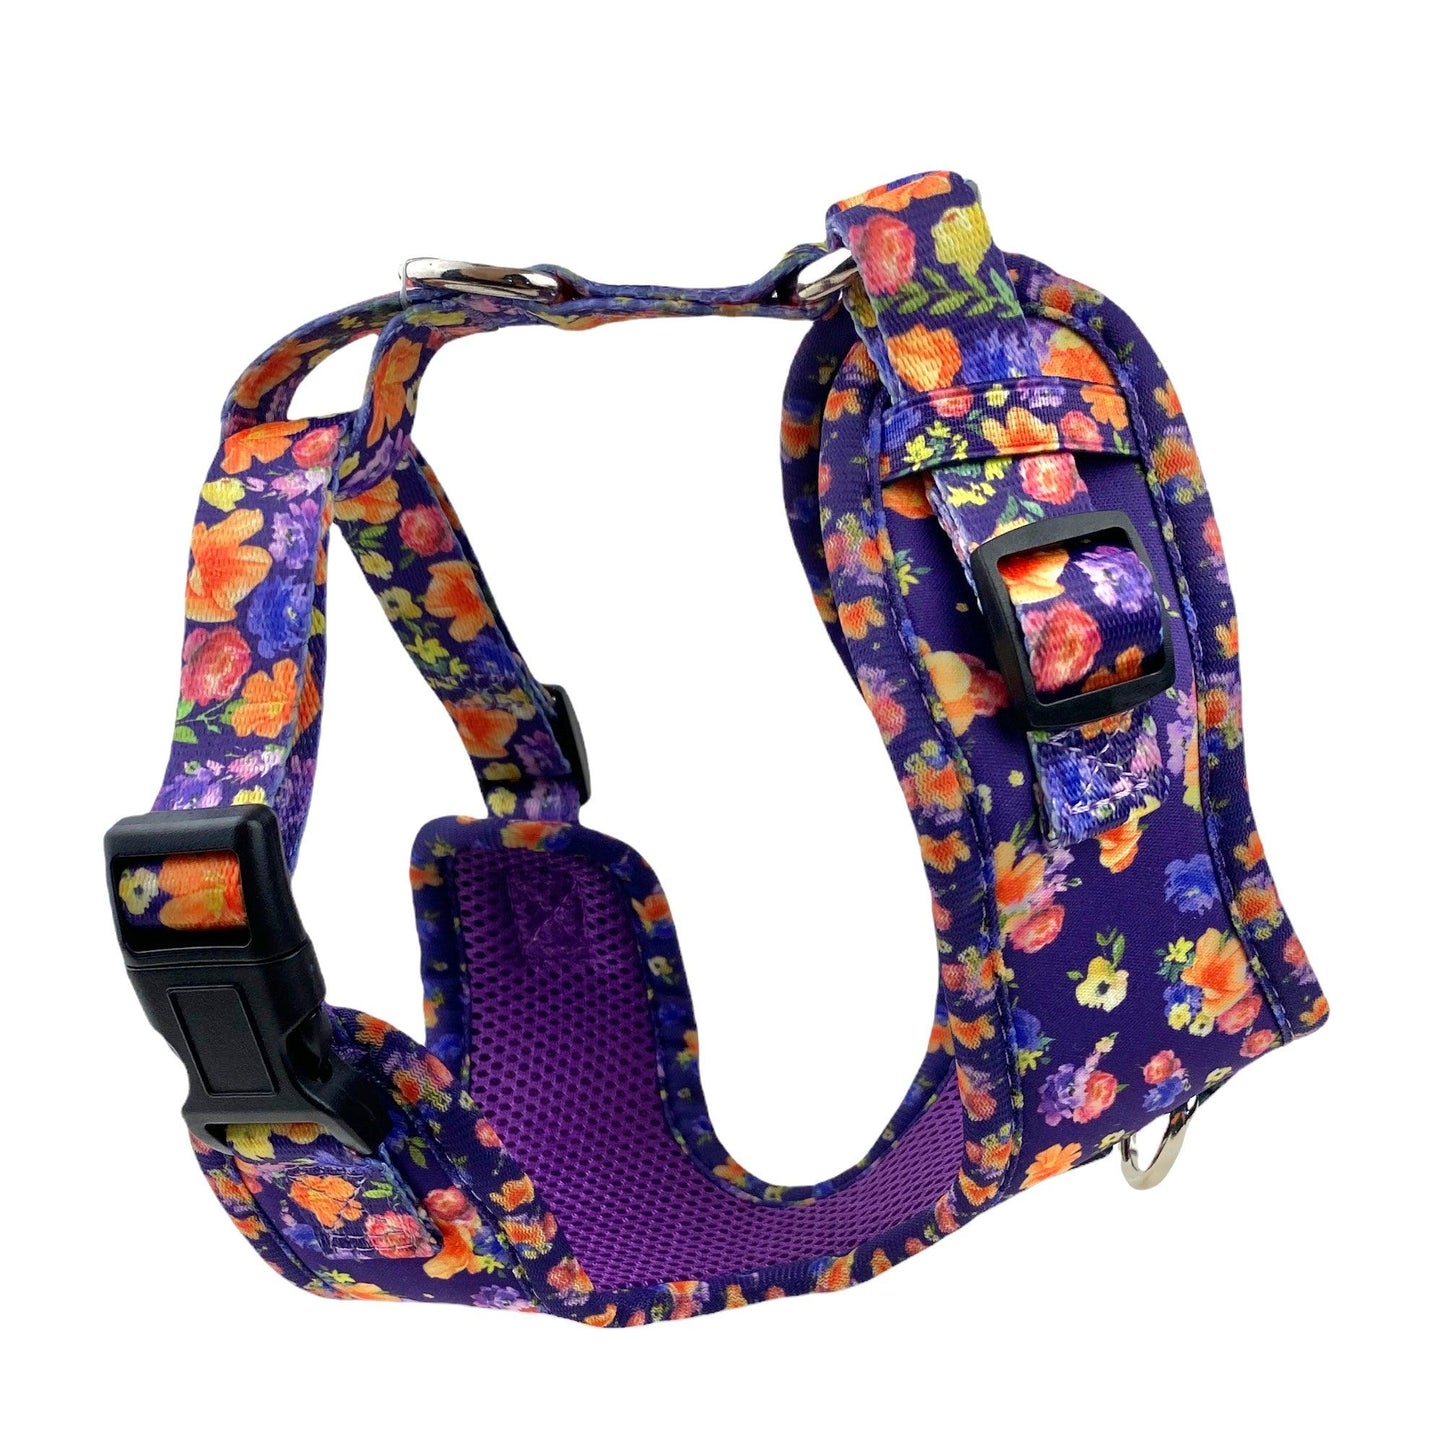 3D image of our purple floral padded dog harness 